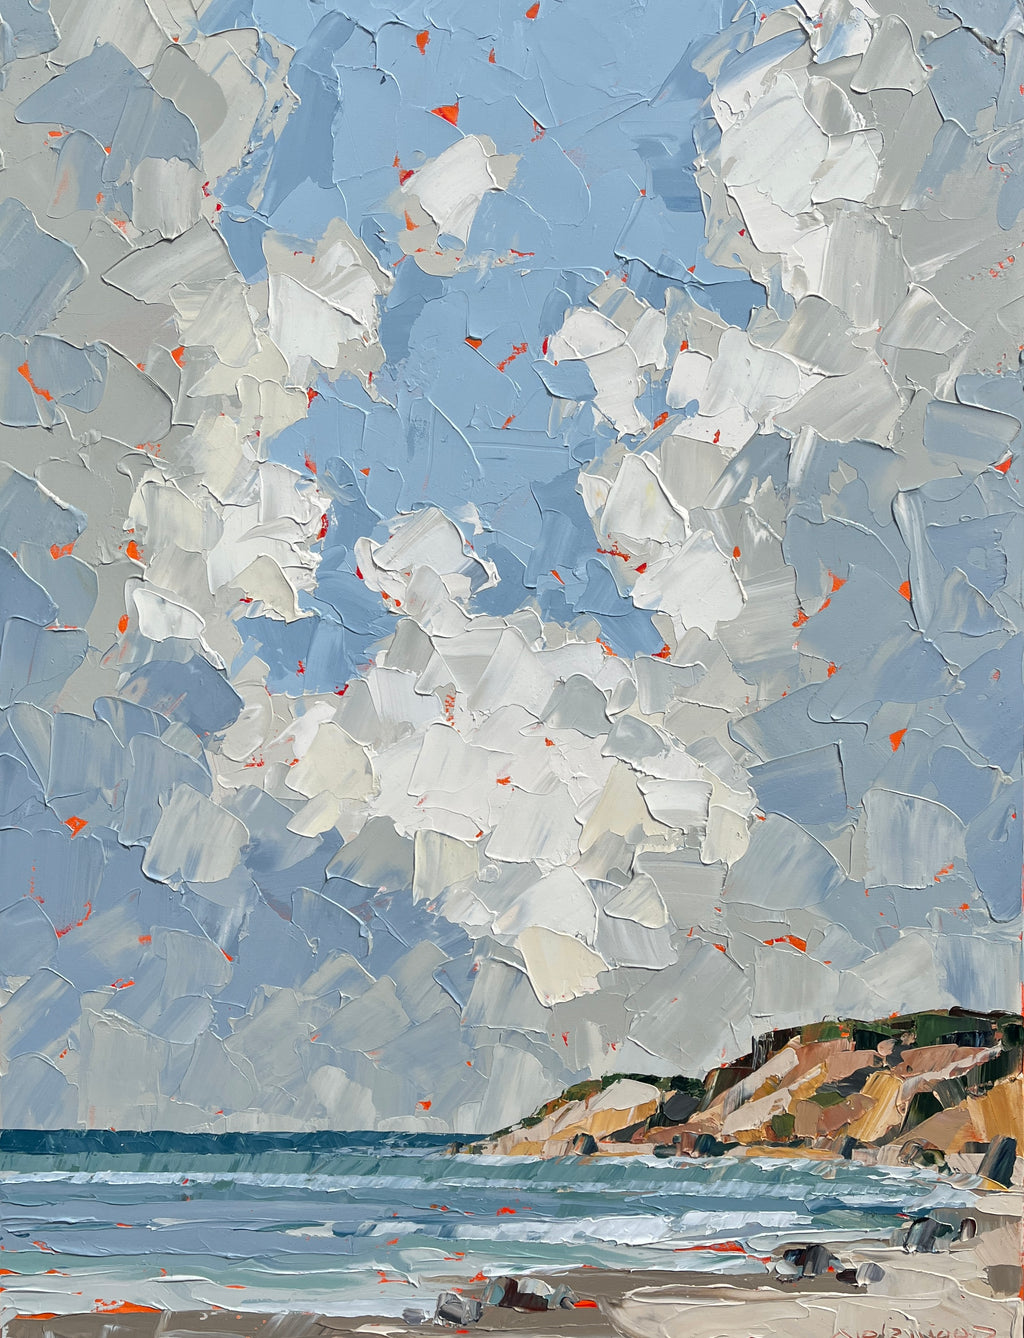 abstract landscape painting of cliffs by the ocean with clouds above